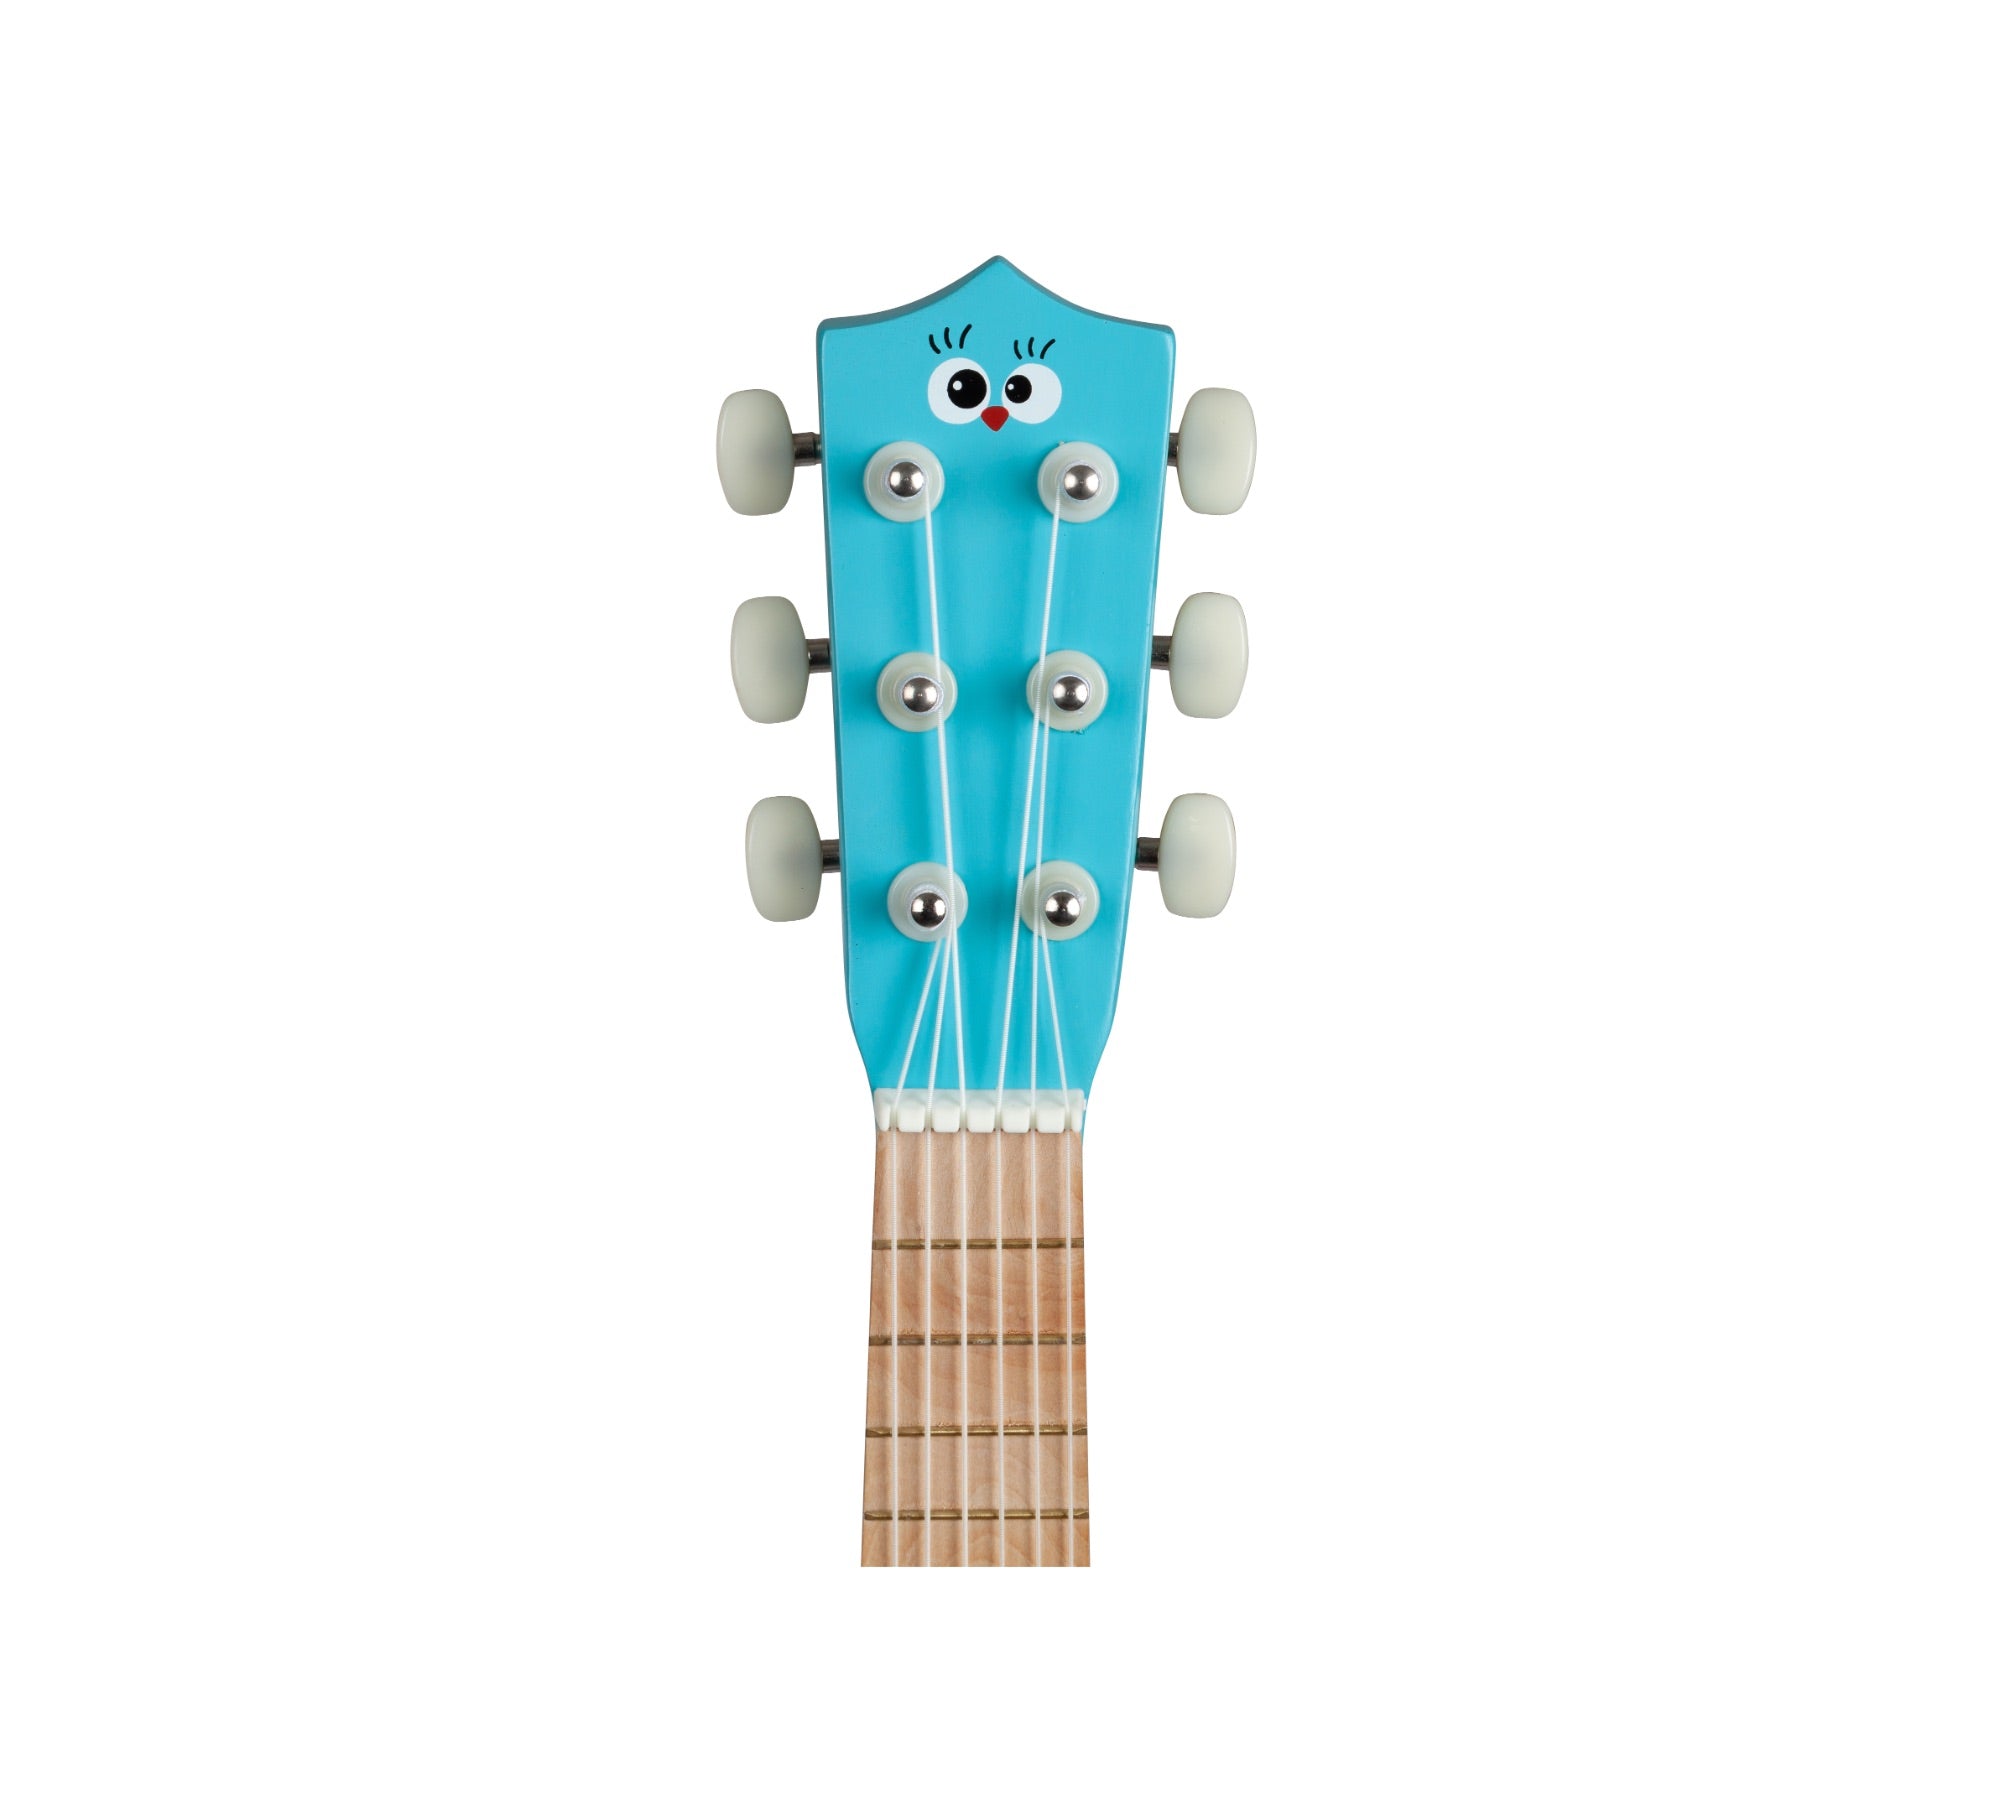 Toysters Wooden Toy Guitar Ukulele with Real Tuning